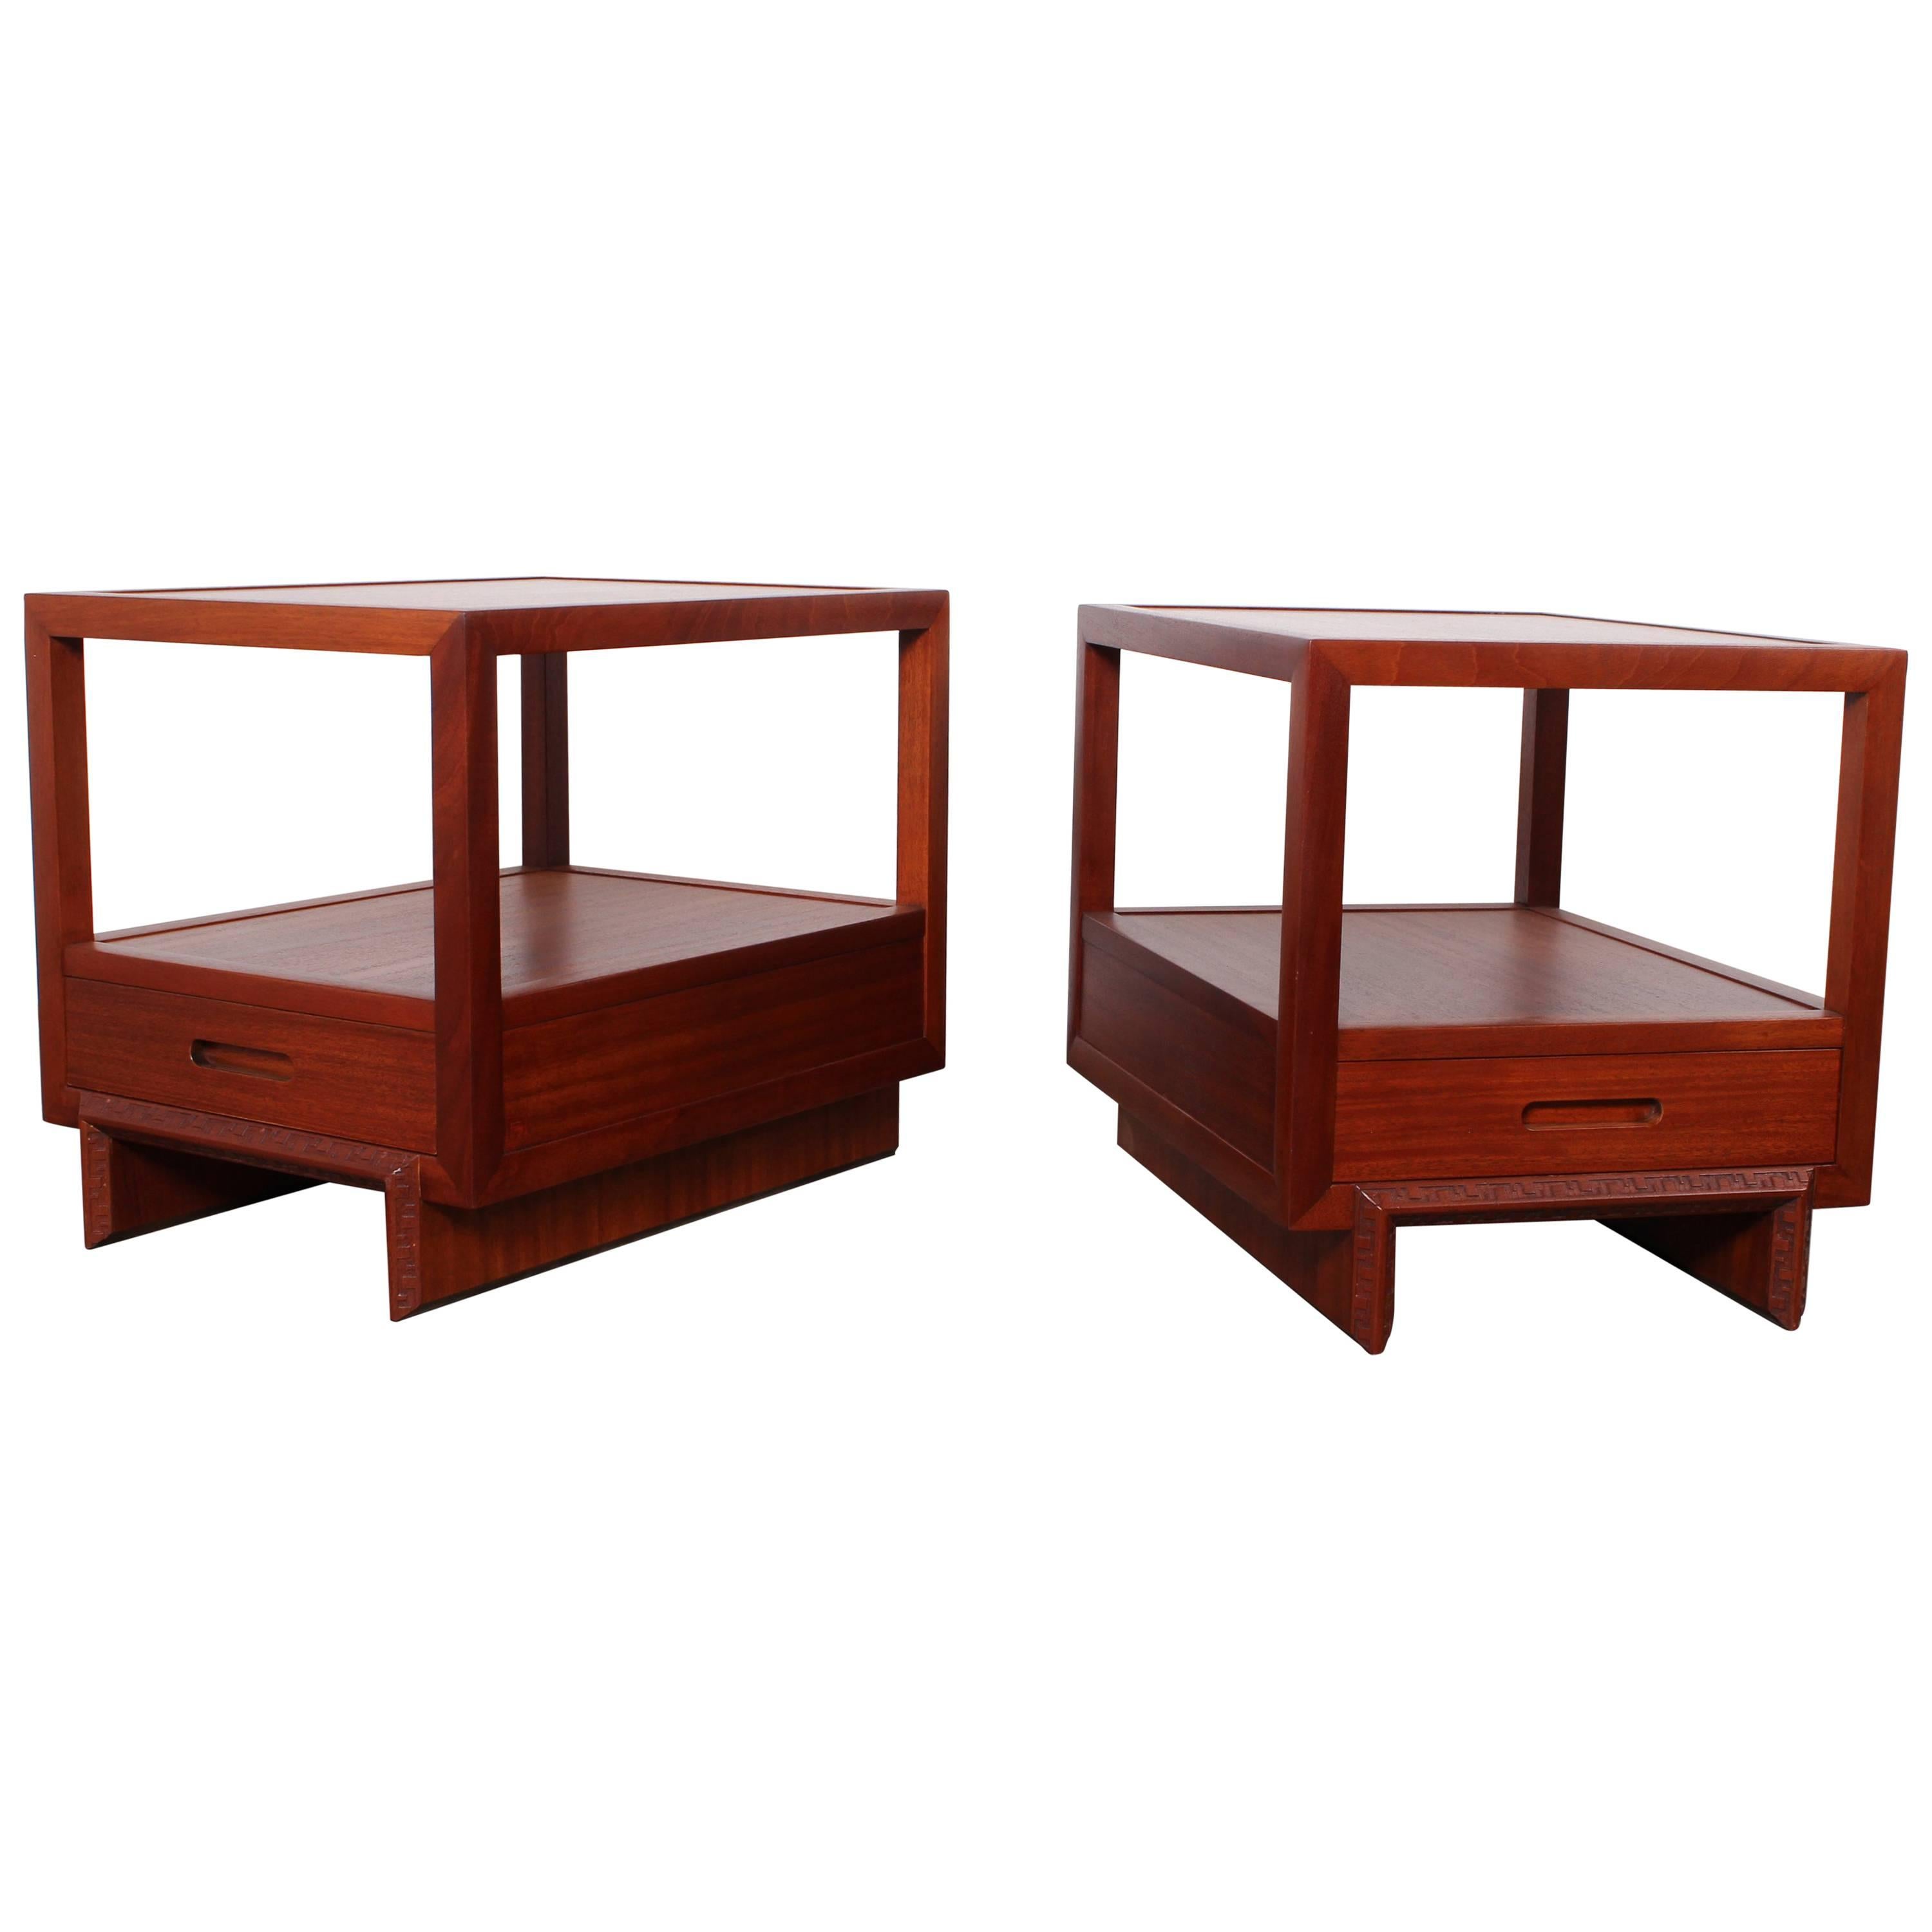 Pair of Nightstands by Frank Lloyd Wright for Henredon